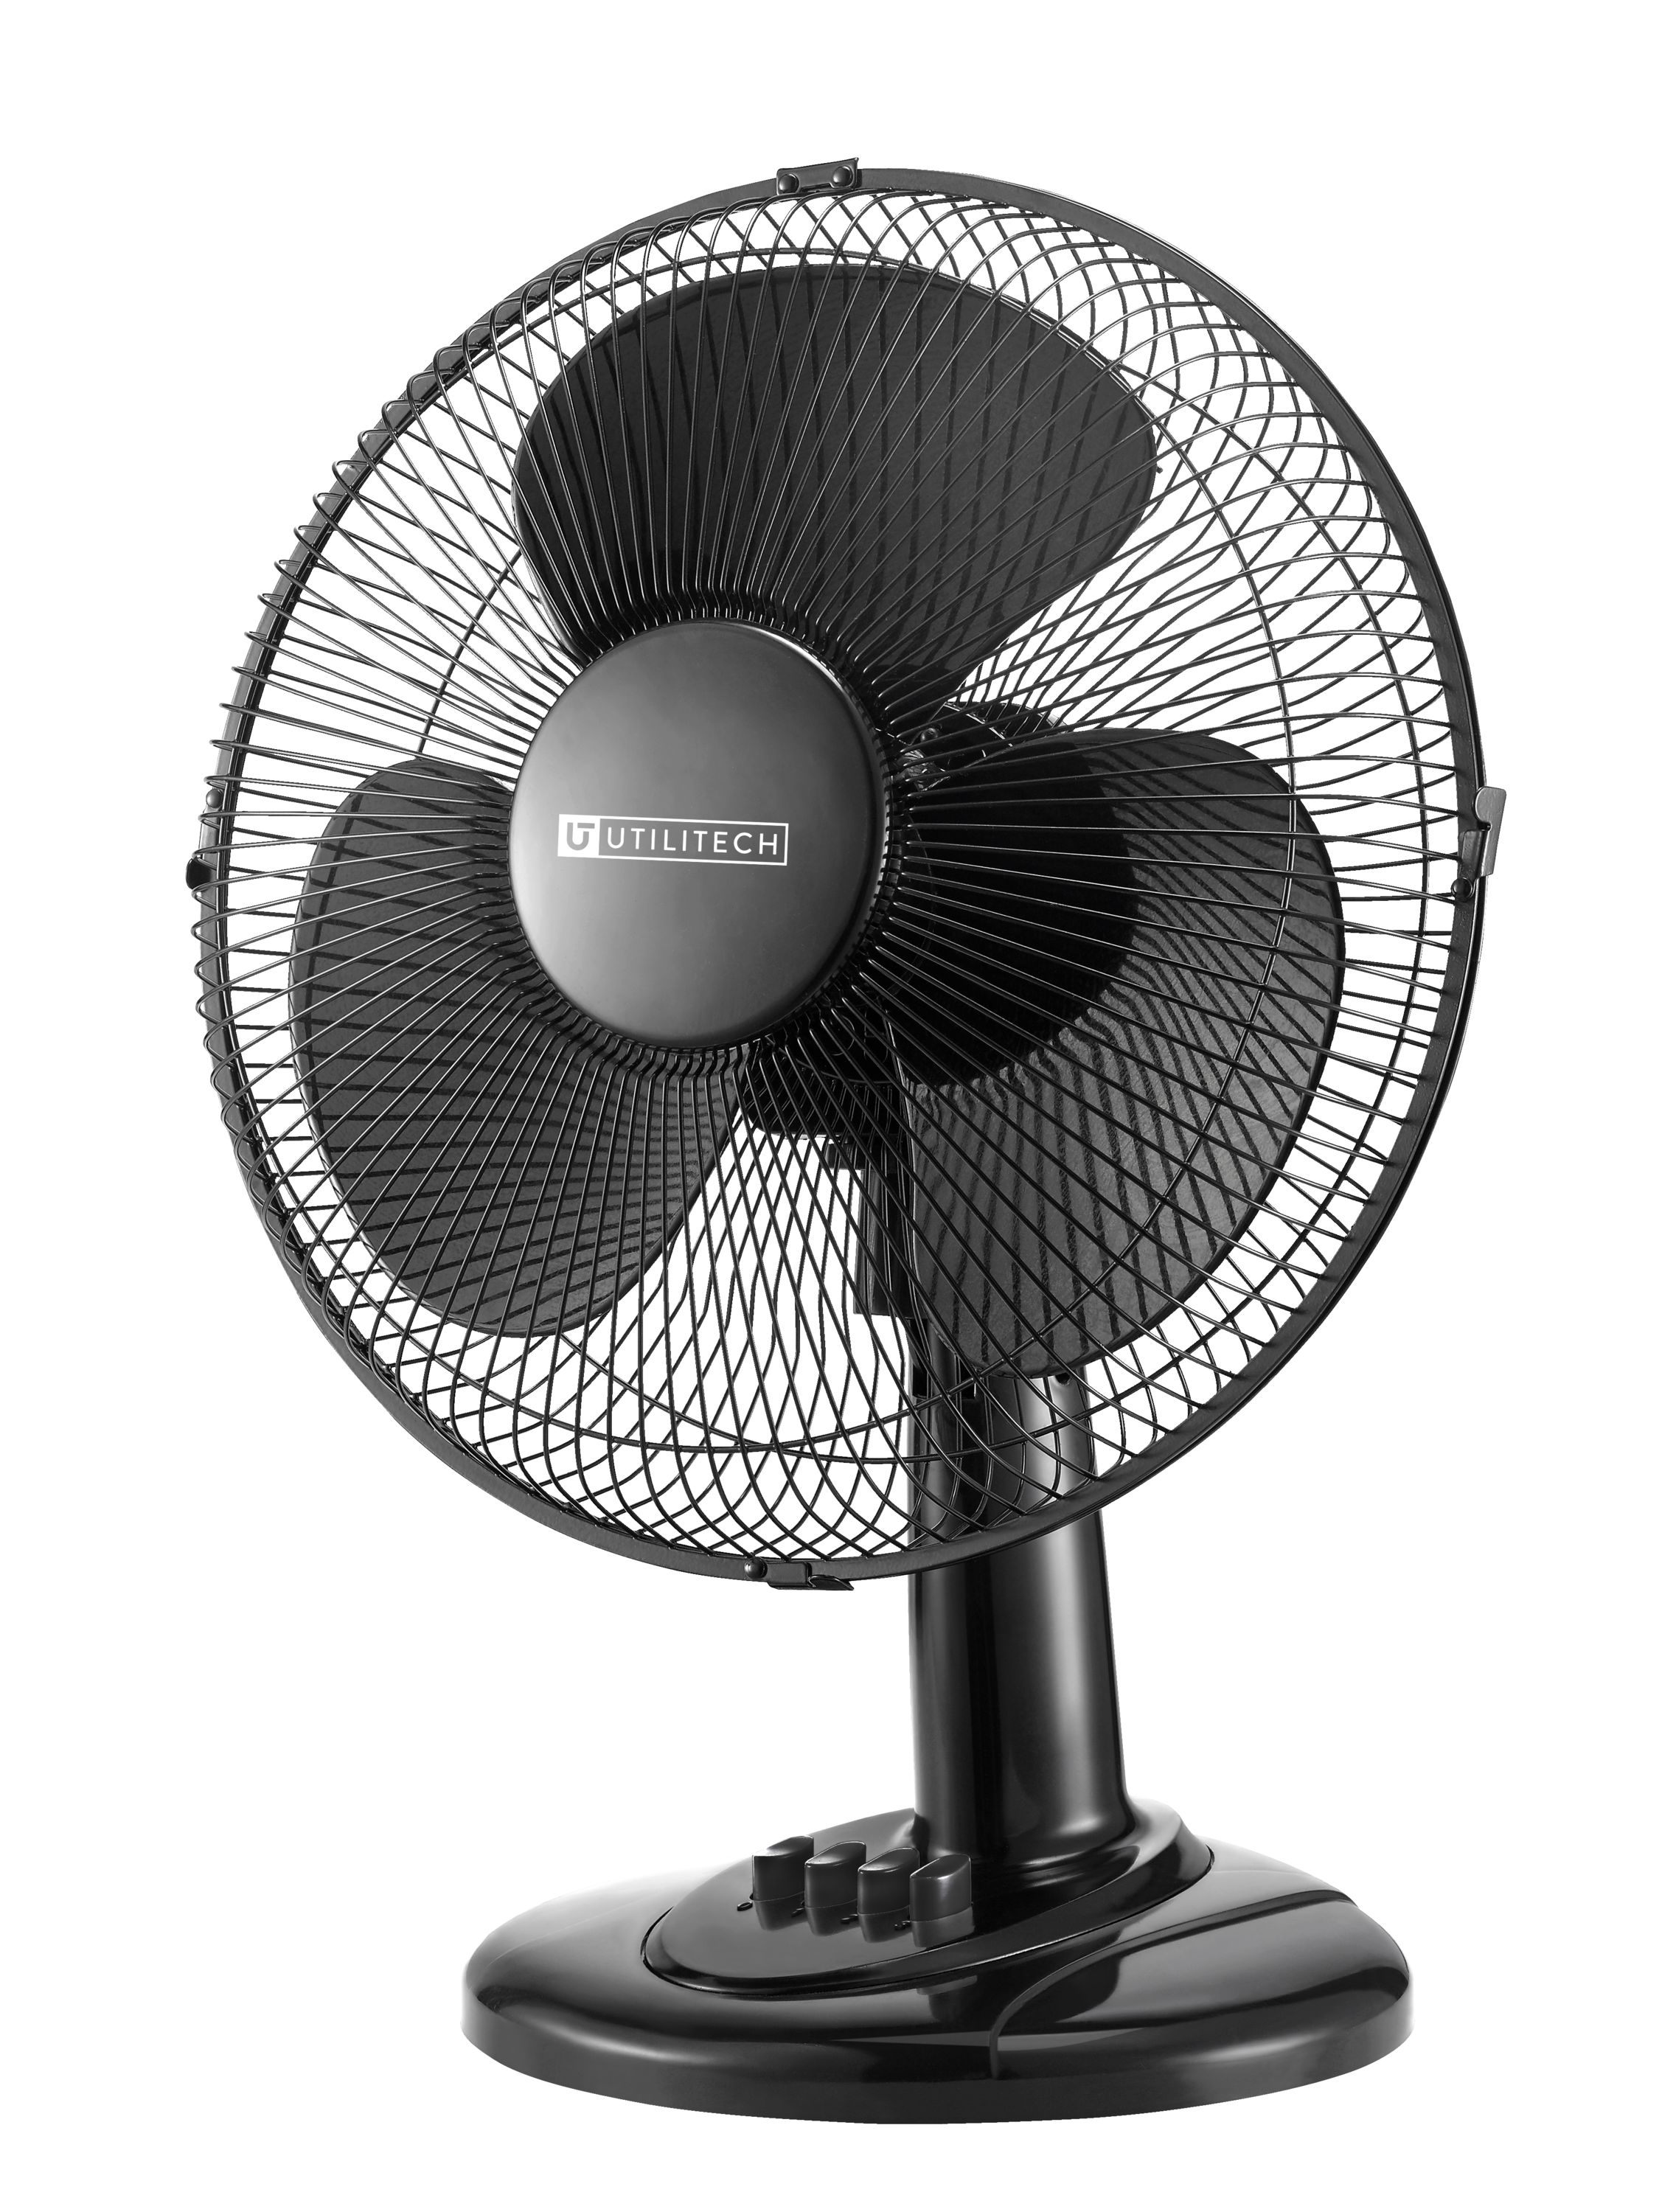 Utilitech 12-in 3-Speed Indoor Oscillating Desk Fan the Portable department at Lowes.com